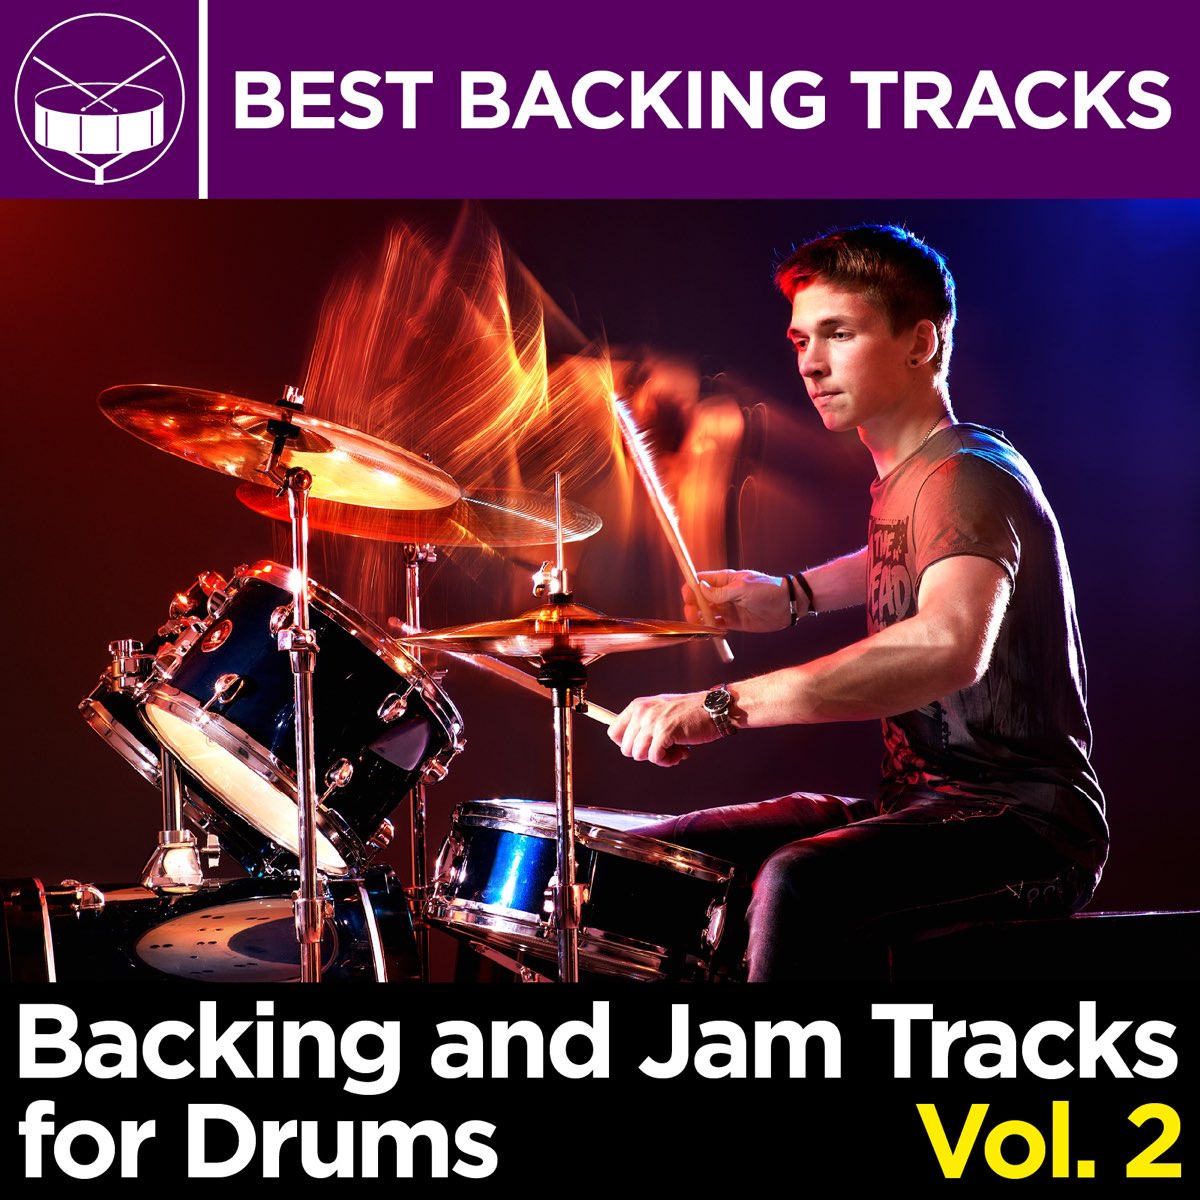 Backing and Jam Tracks for Drums, Vol. 2 - Album by Best Backing Tracks -  Apple Music